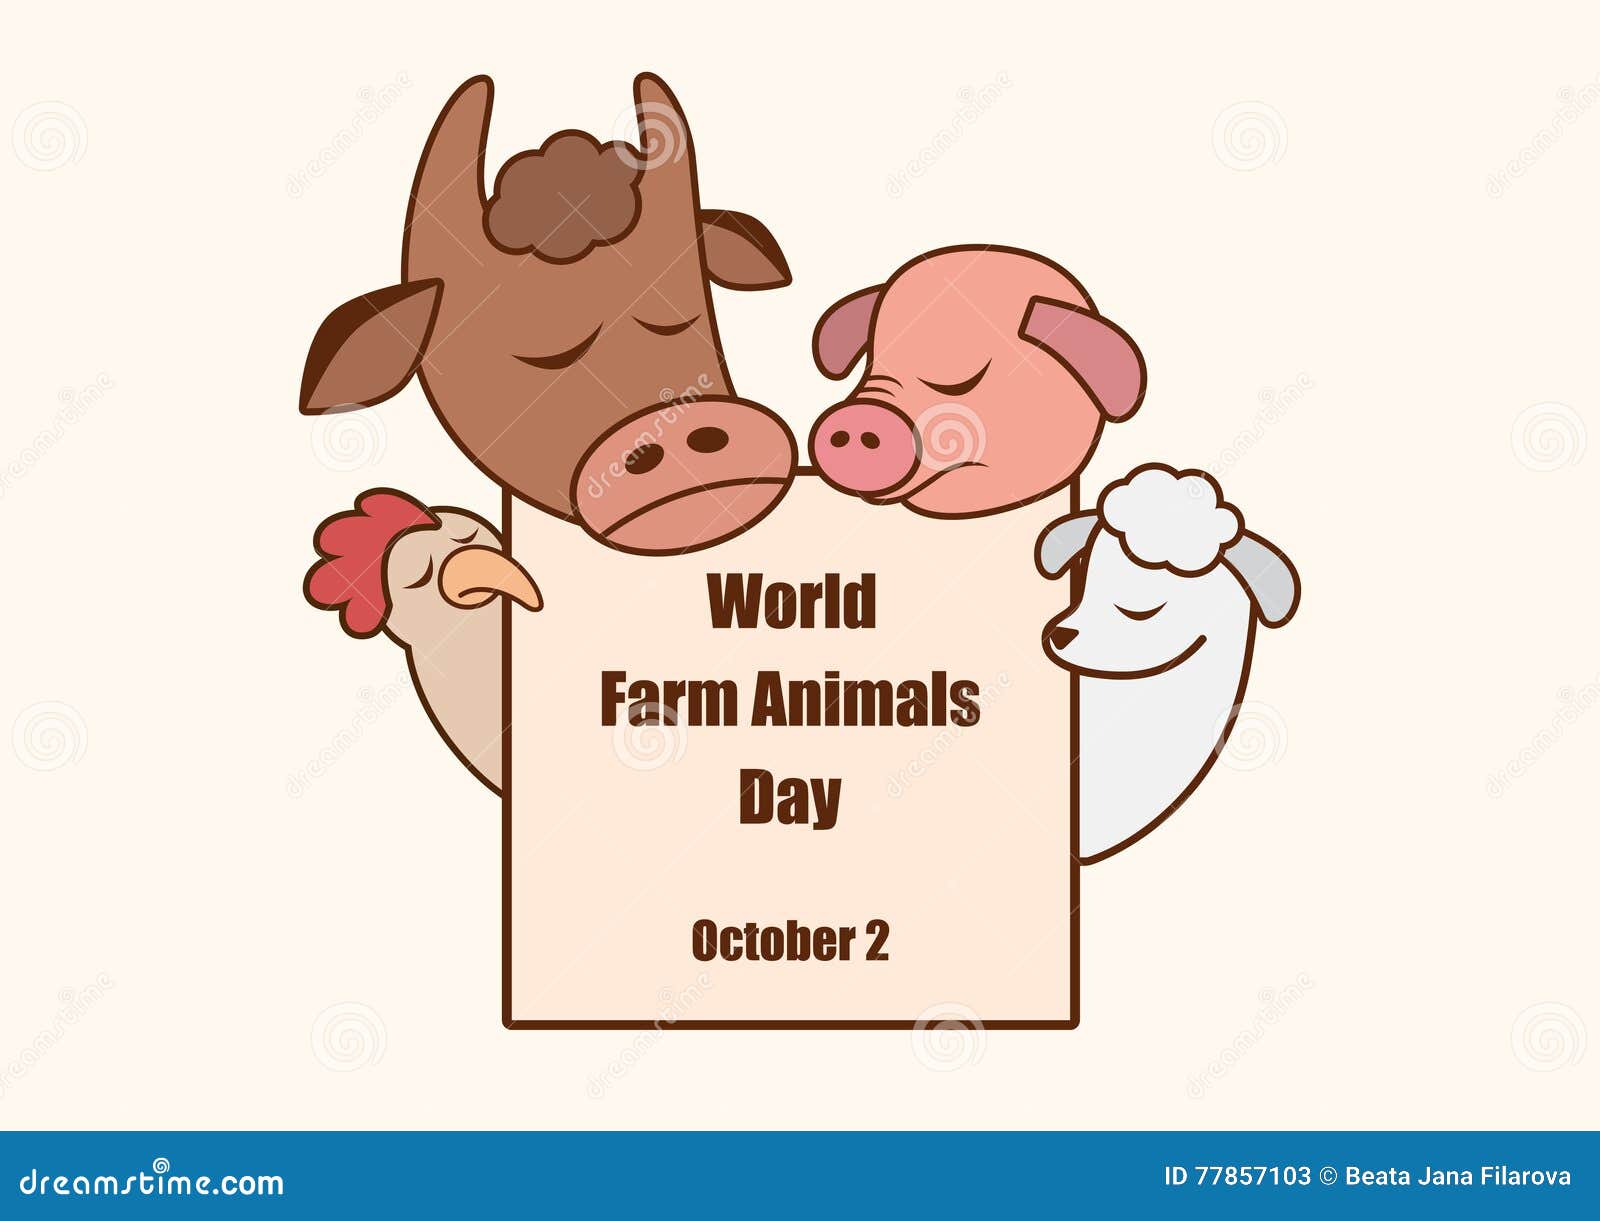 World Farm Animals Day Vector Stock Vector - Illustration of brown,  character: 77857103